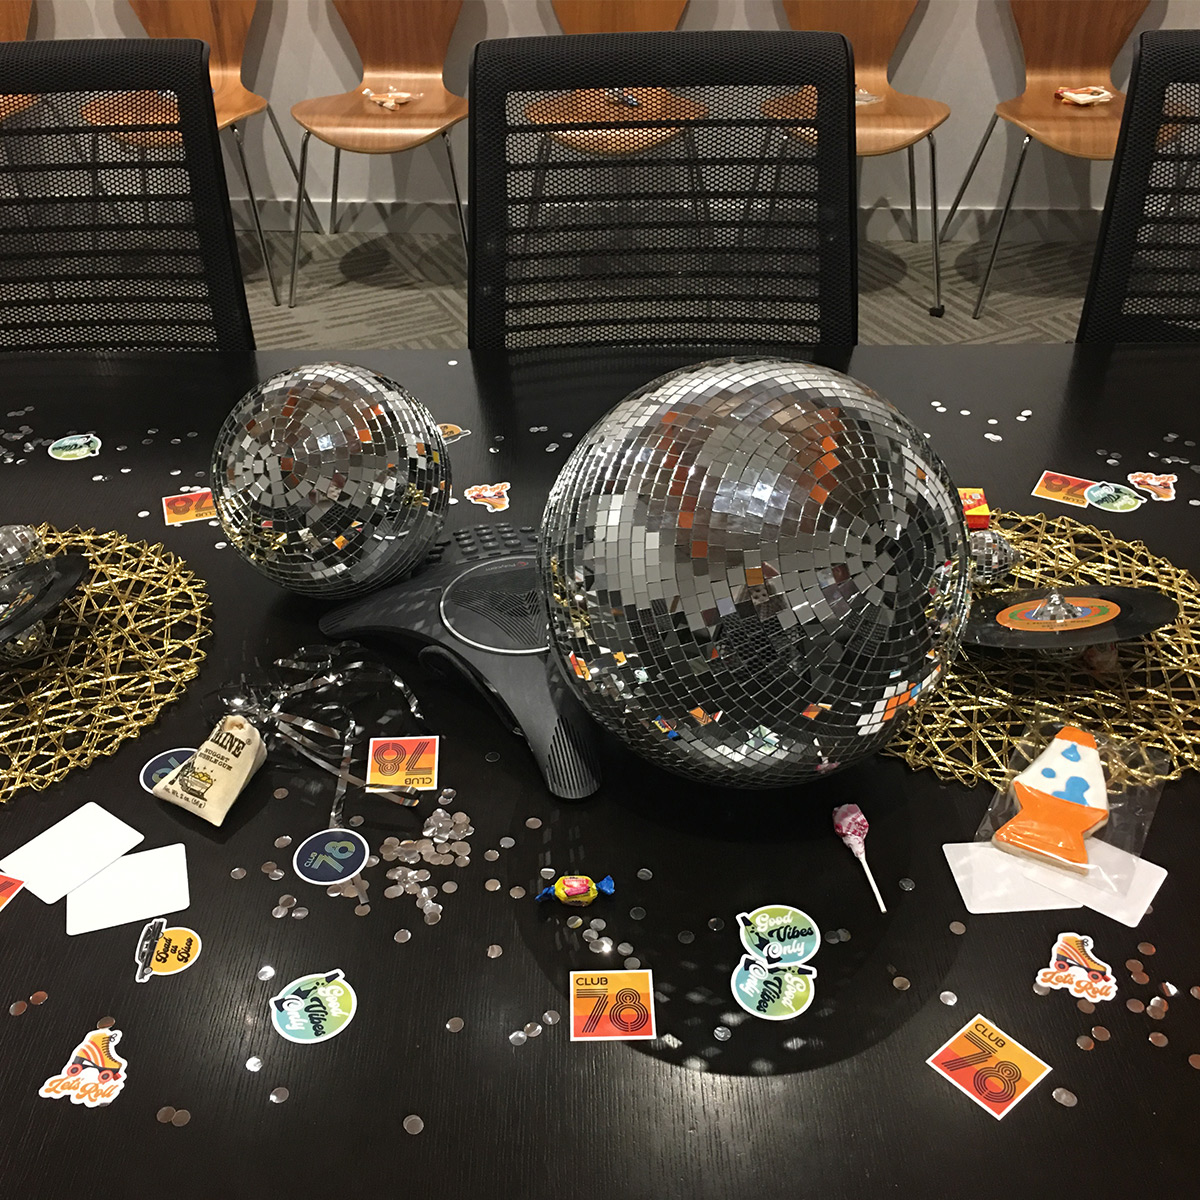 Disco balls as part of the Club 78 launch party decoration.